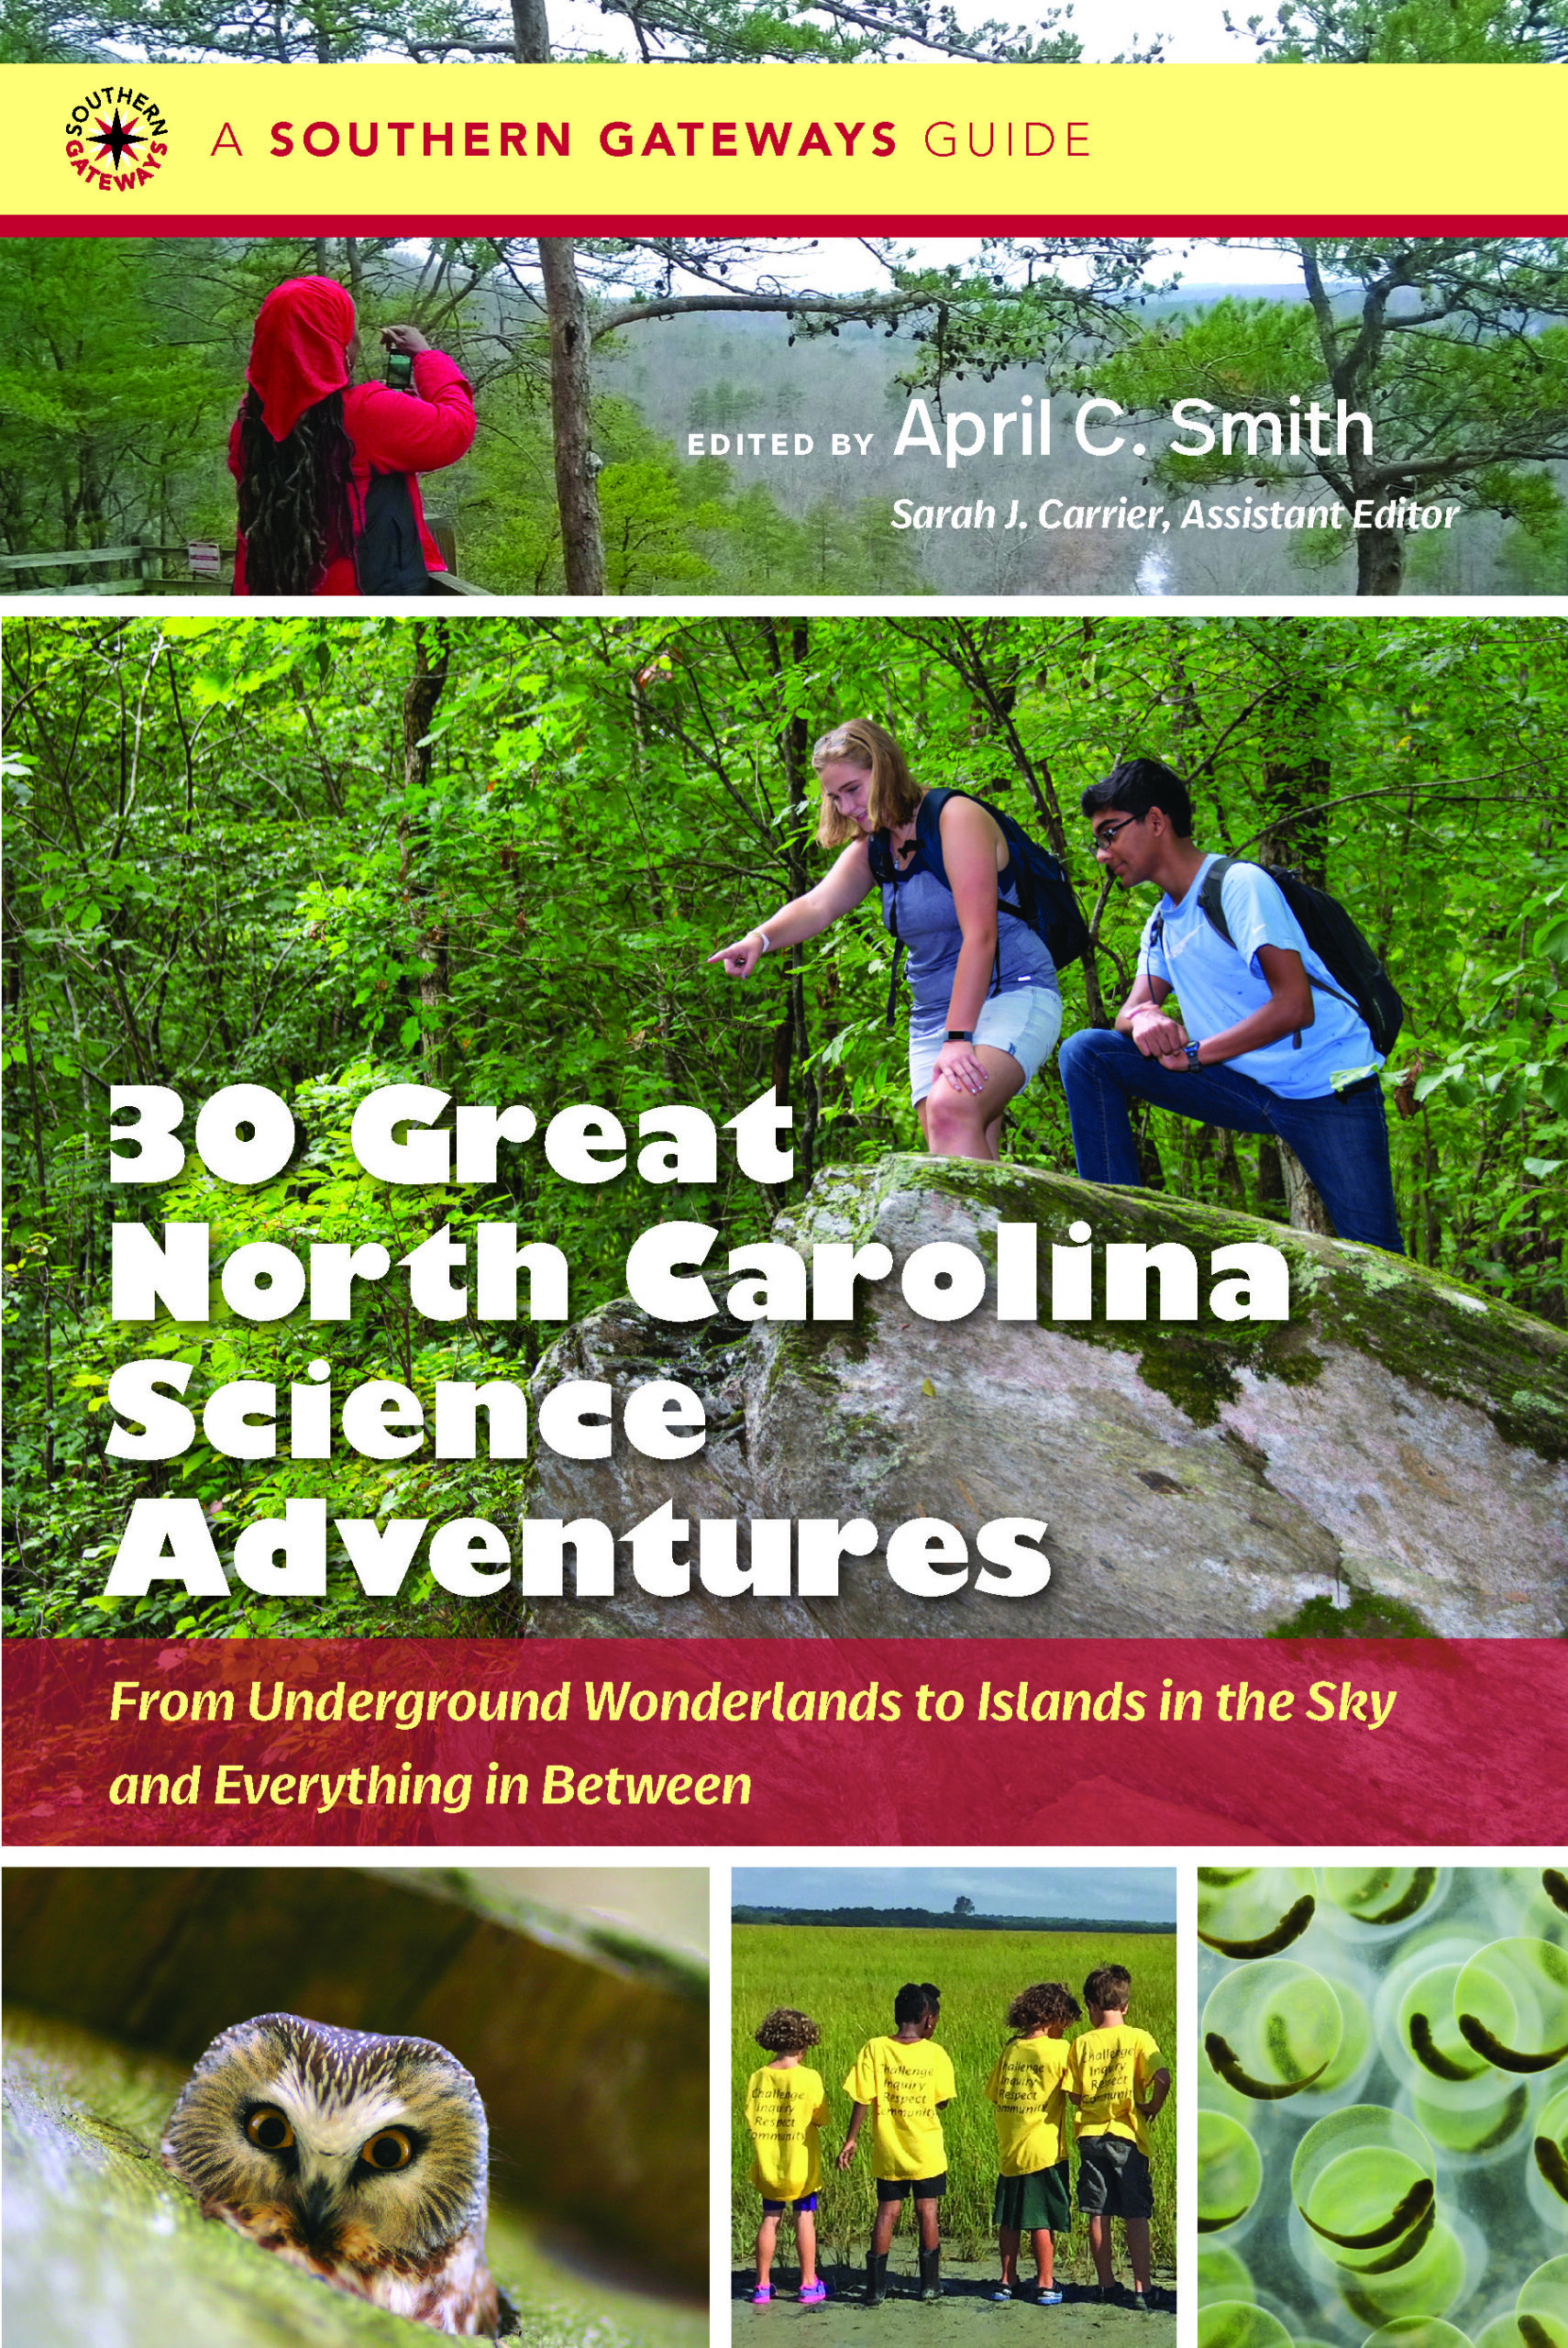 This essay is adapted from "30 Great North Carolina Science Adventures: From Underground Wonderlands to Islands in the Sky and Everything in Between," edited by April C. Smith. Copyright © 2020 by the University of North Carolina Press. Used by permission of the publisher. www.uncpress.org